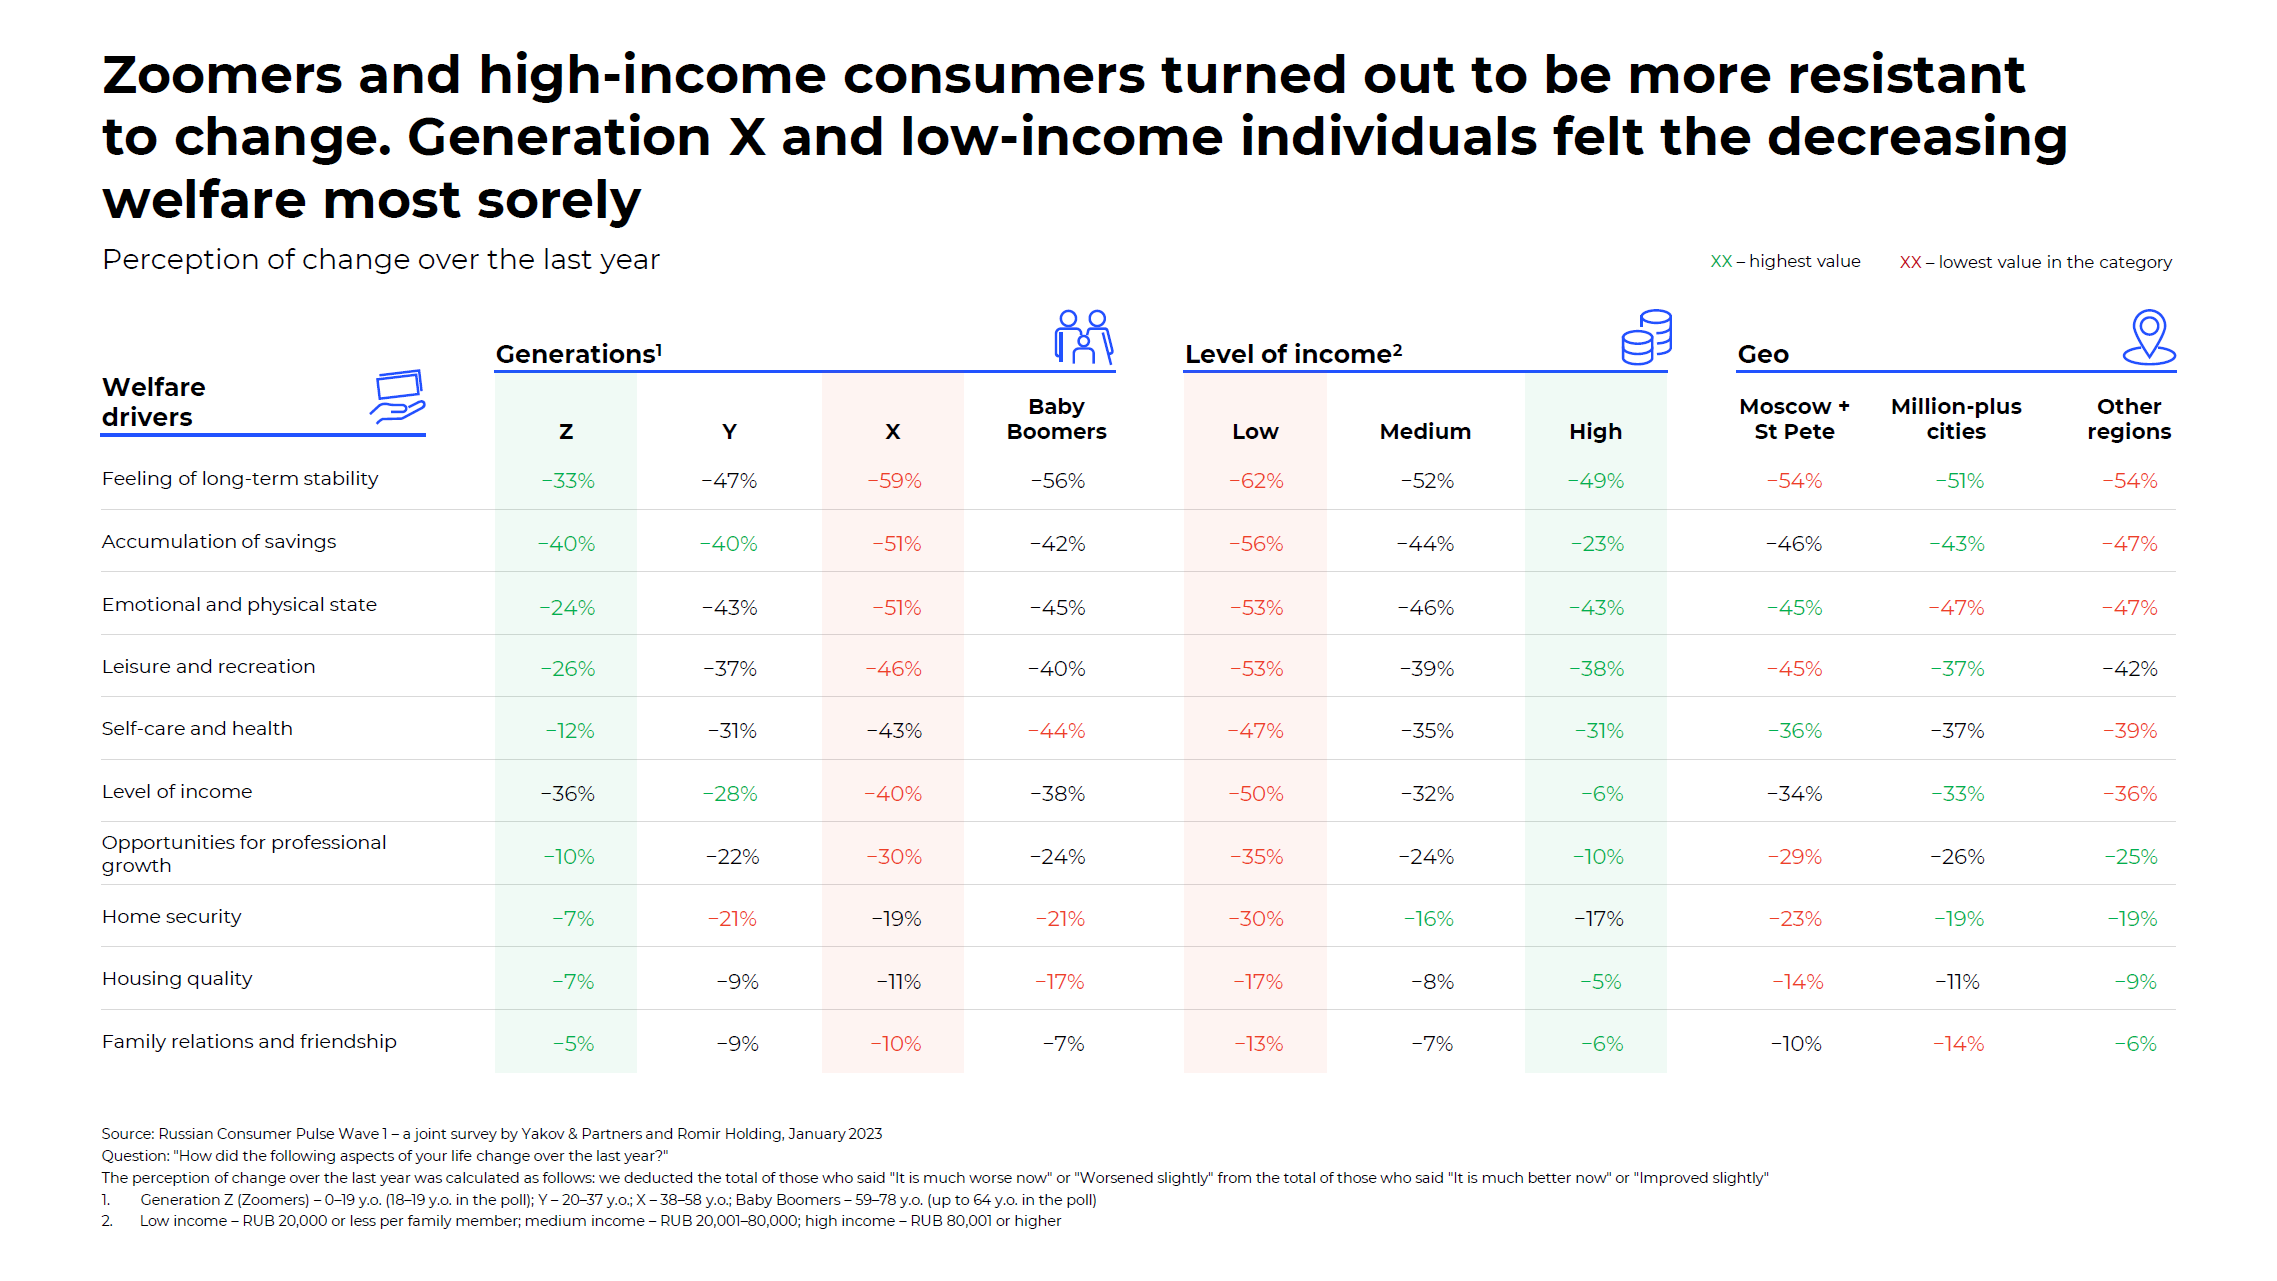 Zoomers and high-income consumers turned out to be more resistant to change. Generation X and low-income individuals felt the decreasing welfare most sorely